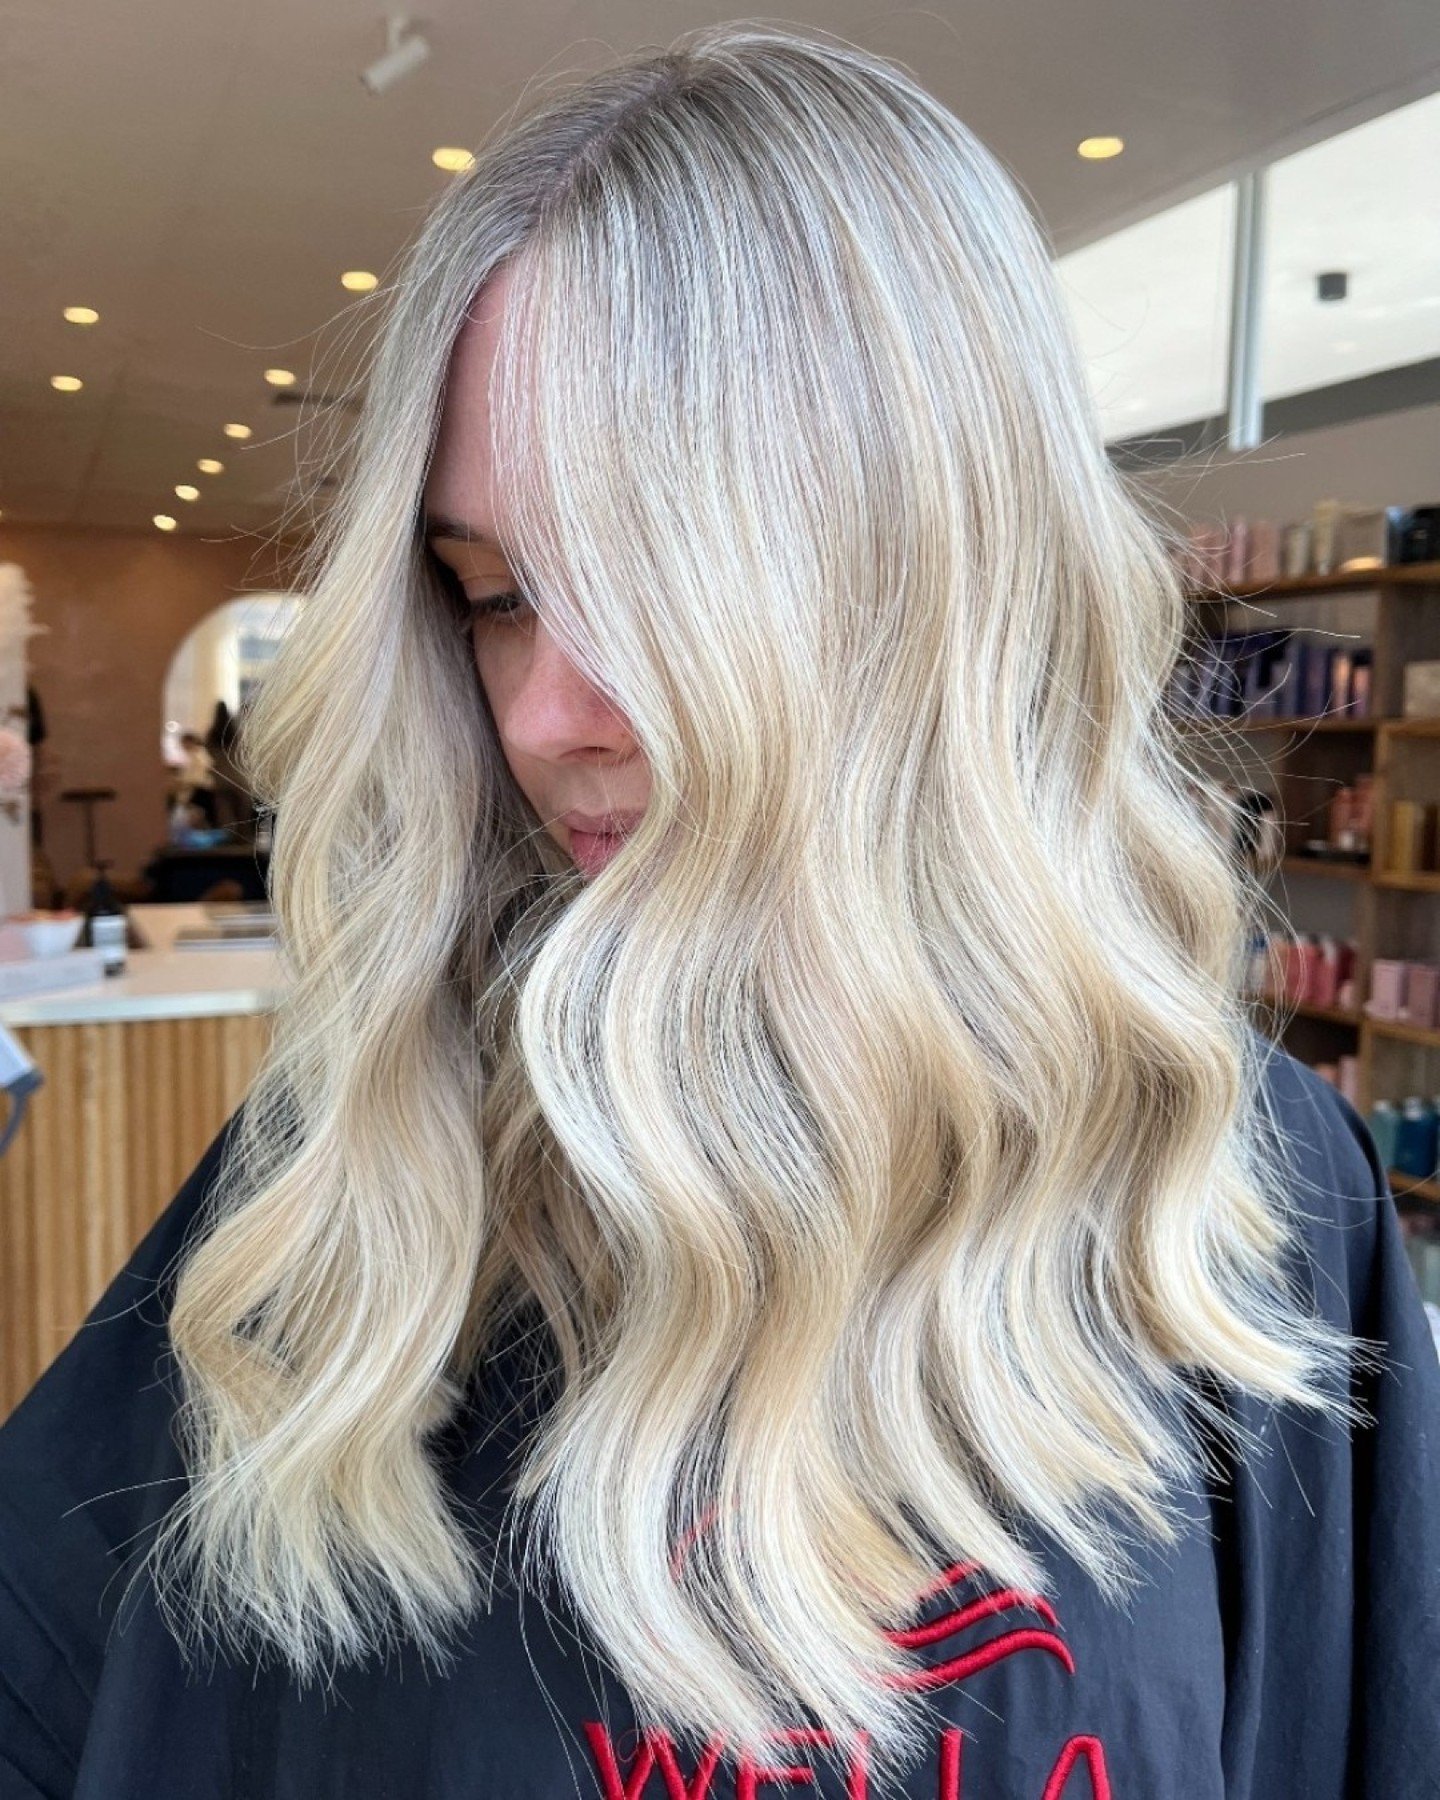 THE PERFECT BLONDE ✨ Senior Stylist @jessica__blondee killing it once again!!! 

SERVICE BREAKDOWN 〰️
🤍 Half head of highlights
🤍 Toner
🤍 Root shadow
🤍 K18 treatment
🤍 Haircut, blowdry &amp; style

SAVE THIS 〰️ For your bright blonde inspo!

#We